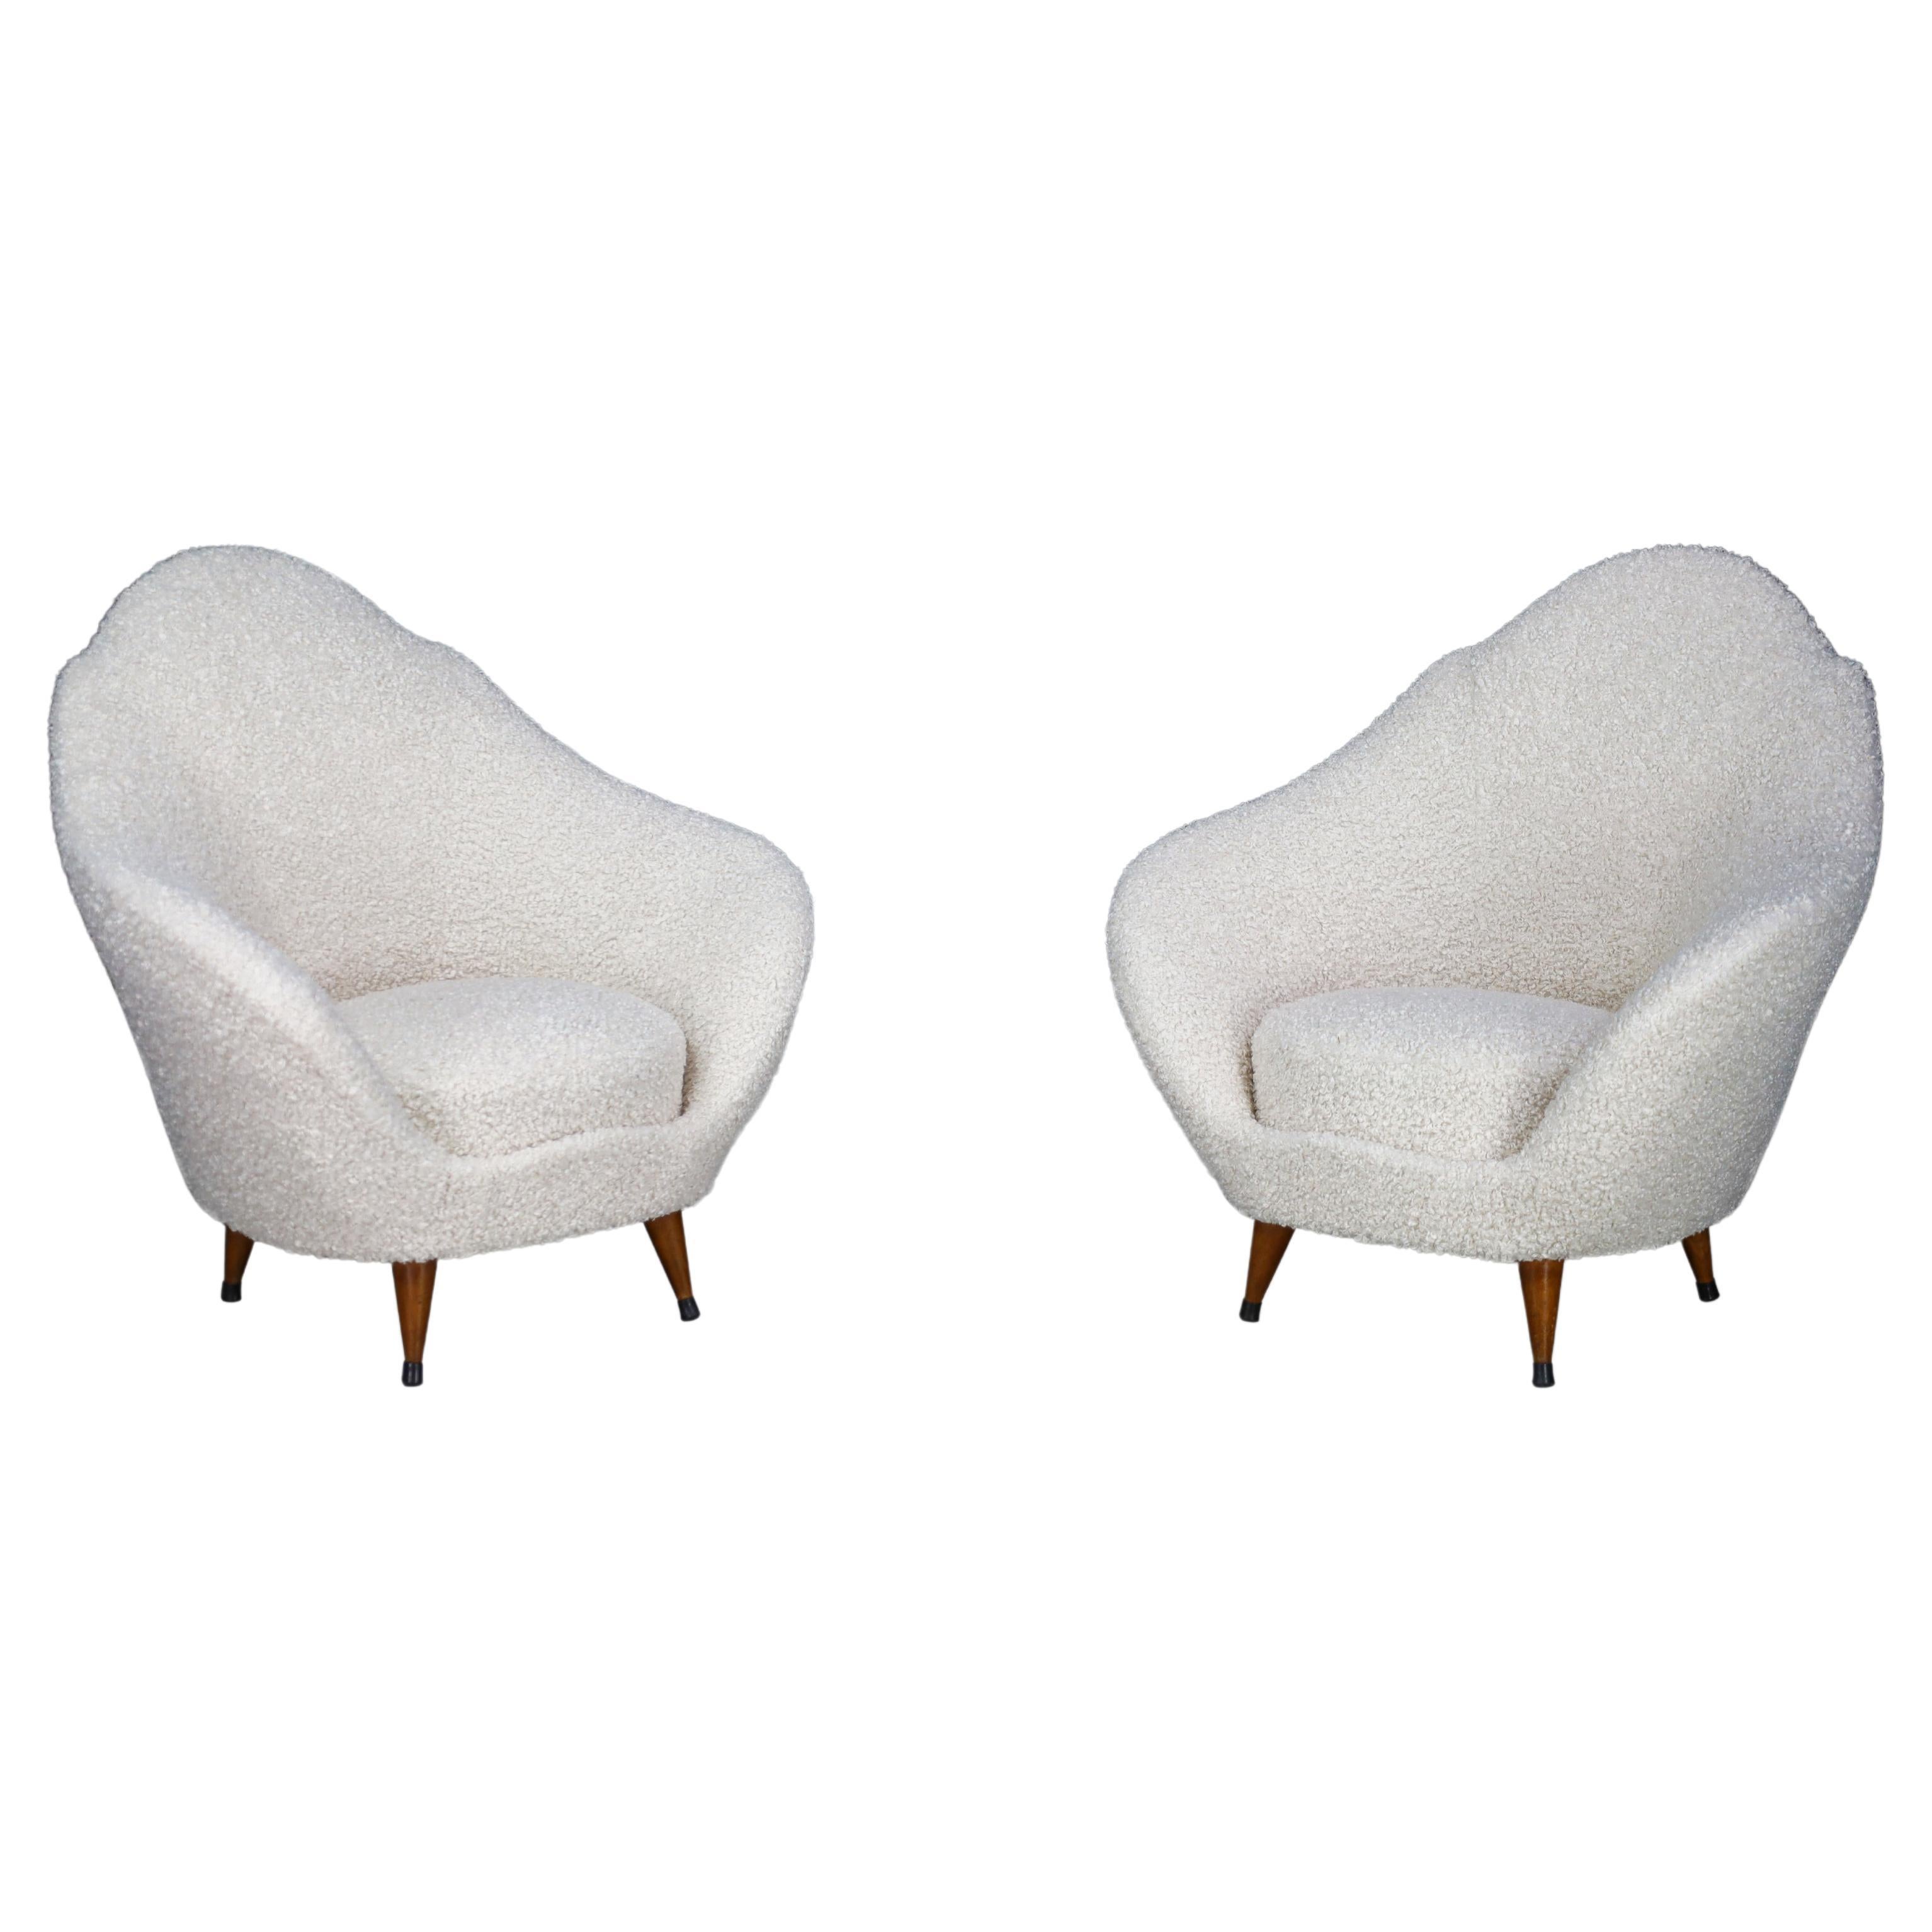 Federico Munari Lounge Chairs with Conical Feet and Teddy Upholstery, Italy 1940 For Sale